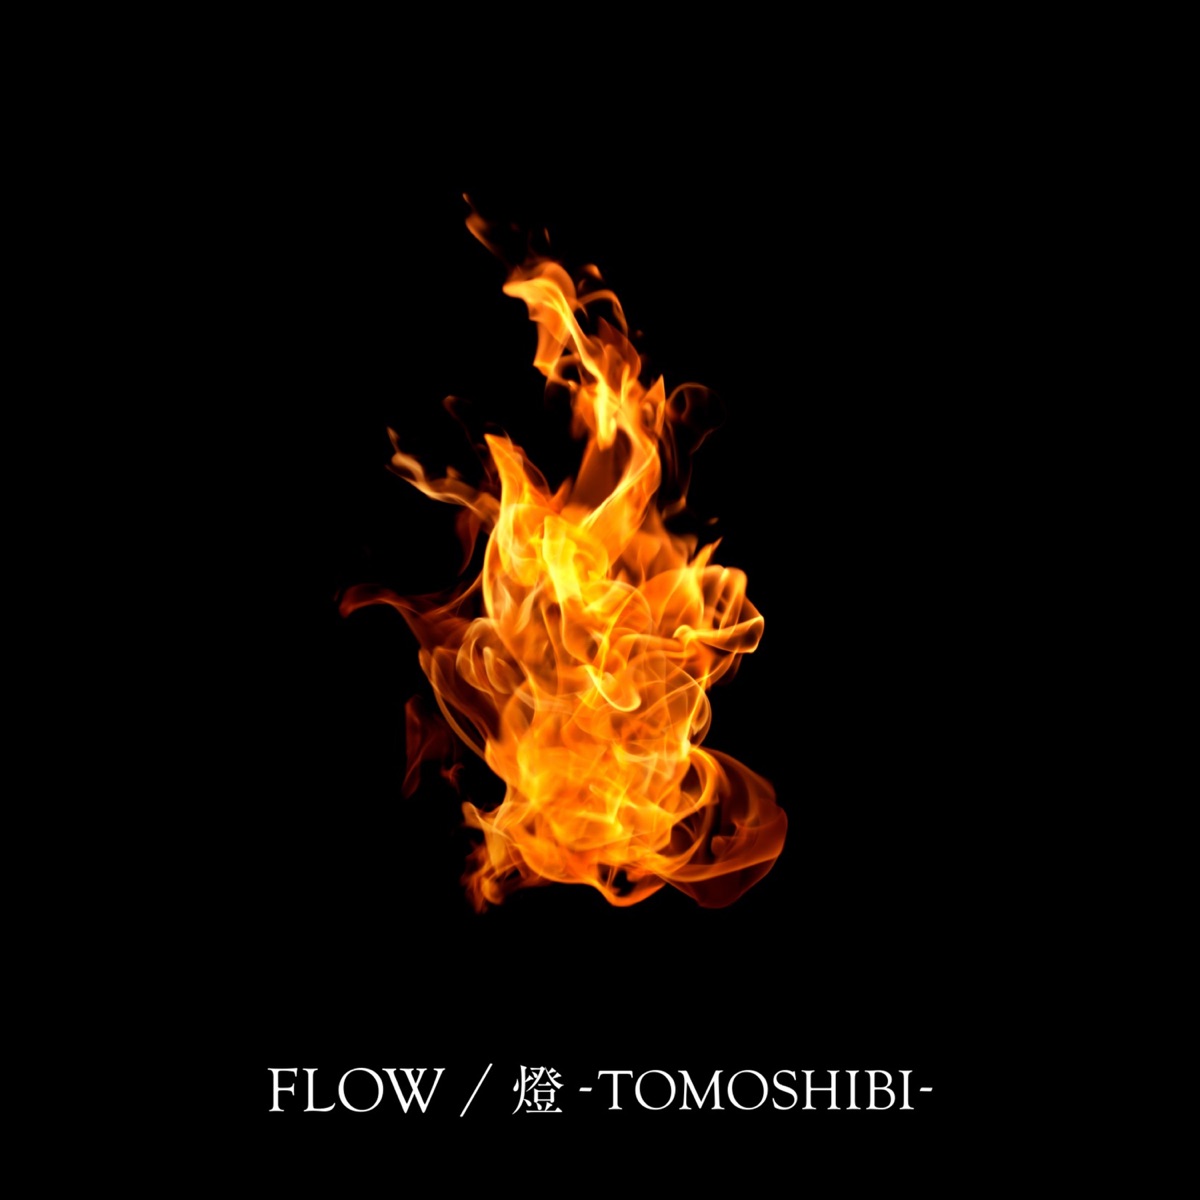 Cover art for『FLOW - 燈』from the release『TOMOSHIBI